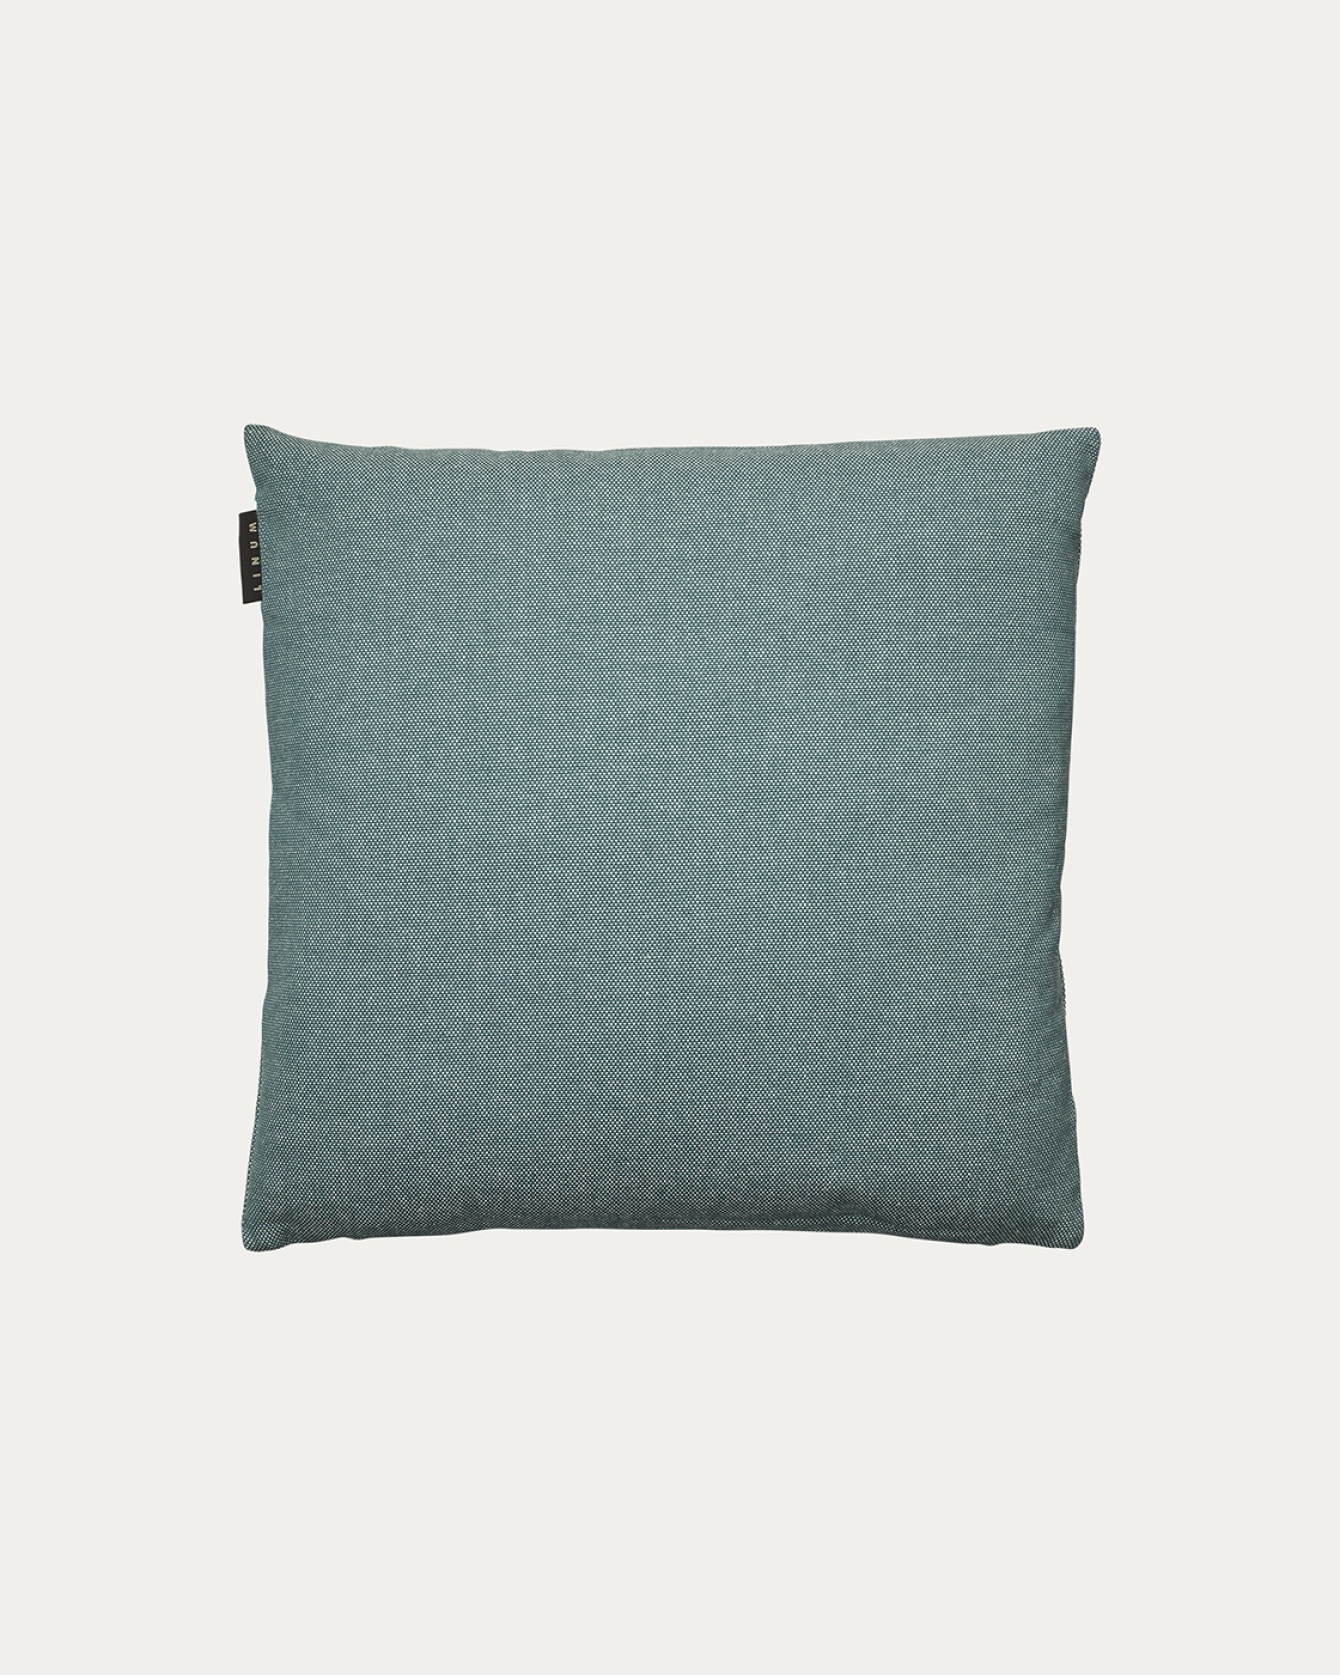 Product image dark grey turquoise PEPPER cushion cover made of soft cotton from LINUM DESIGN. Easy to wash and durable for generations. Size 40x40 cm.